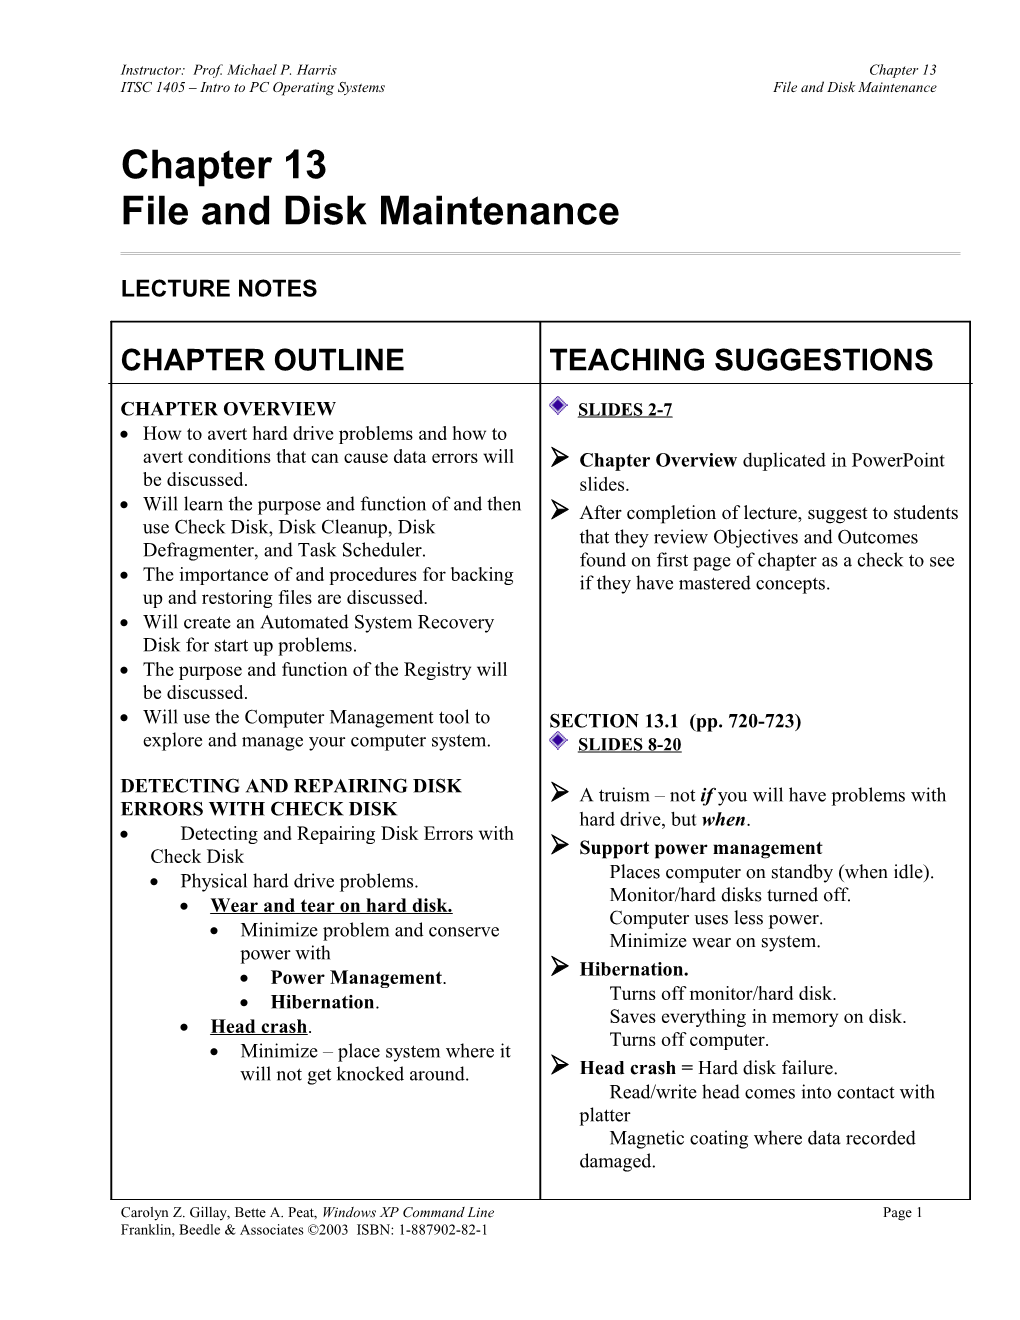 Ch 13 File And Disk Maintenance